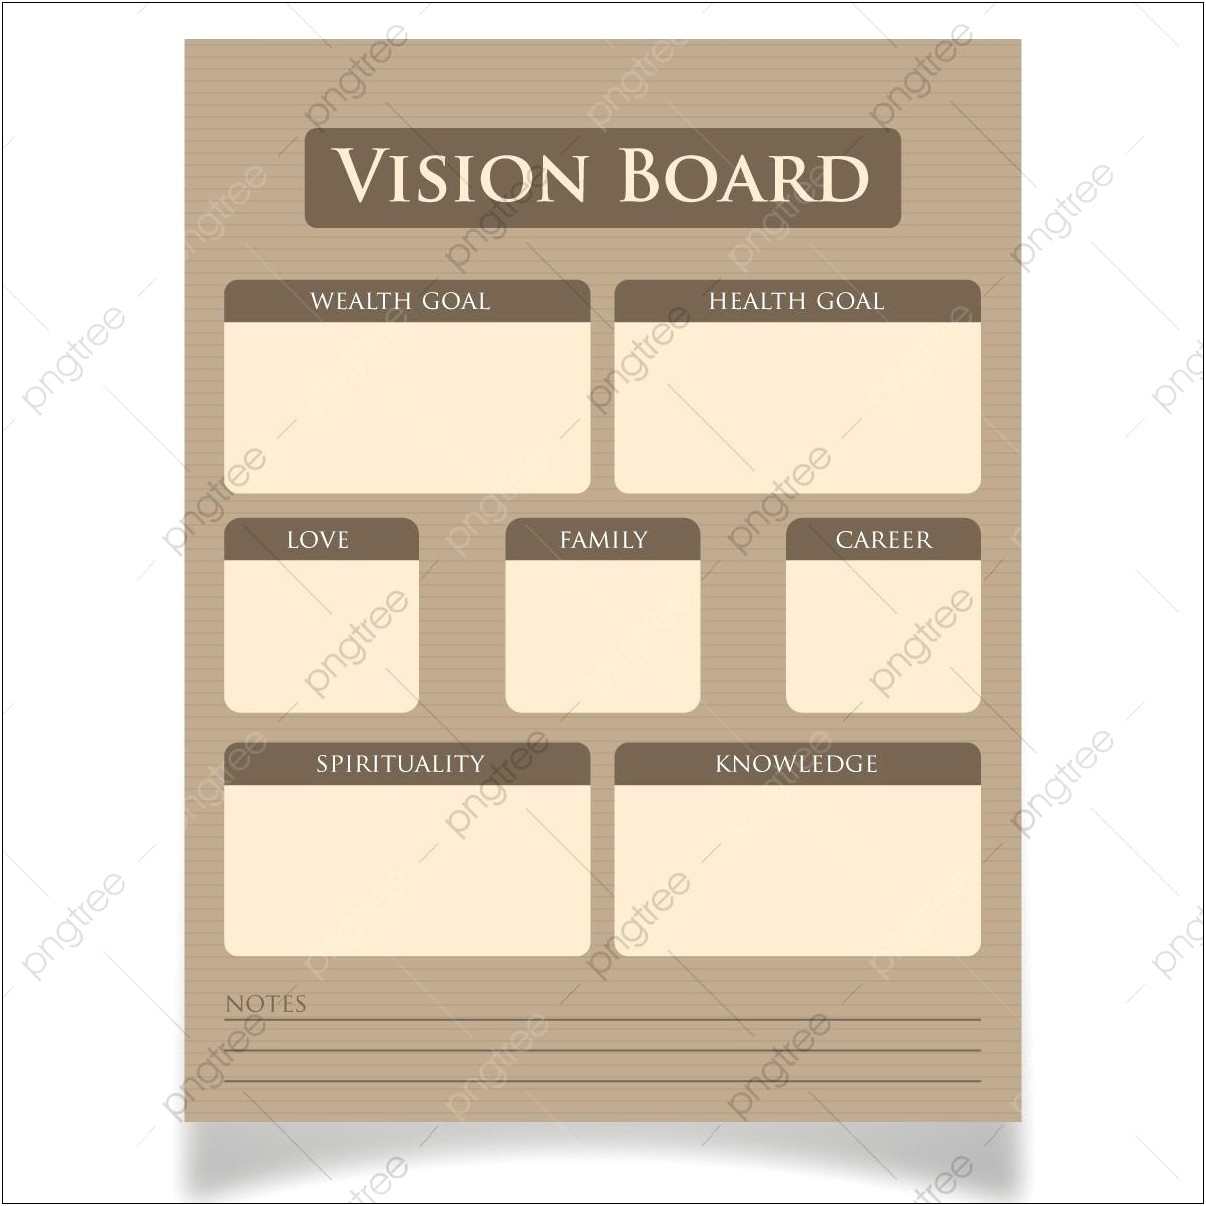 Free Vision Board Party Invitation Template Templates : Resume